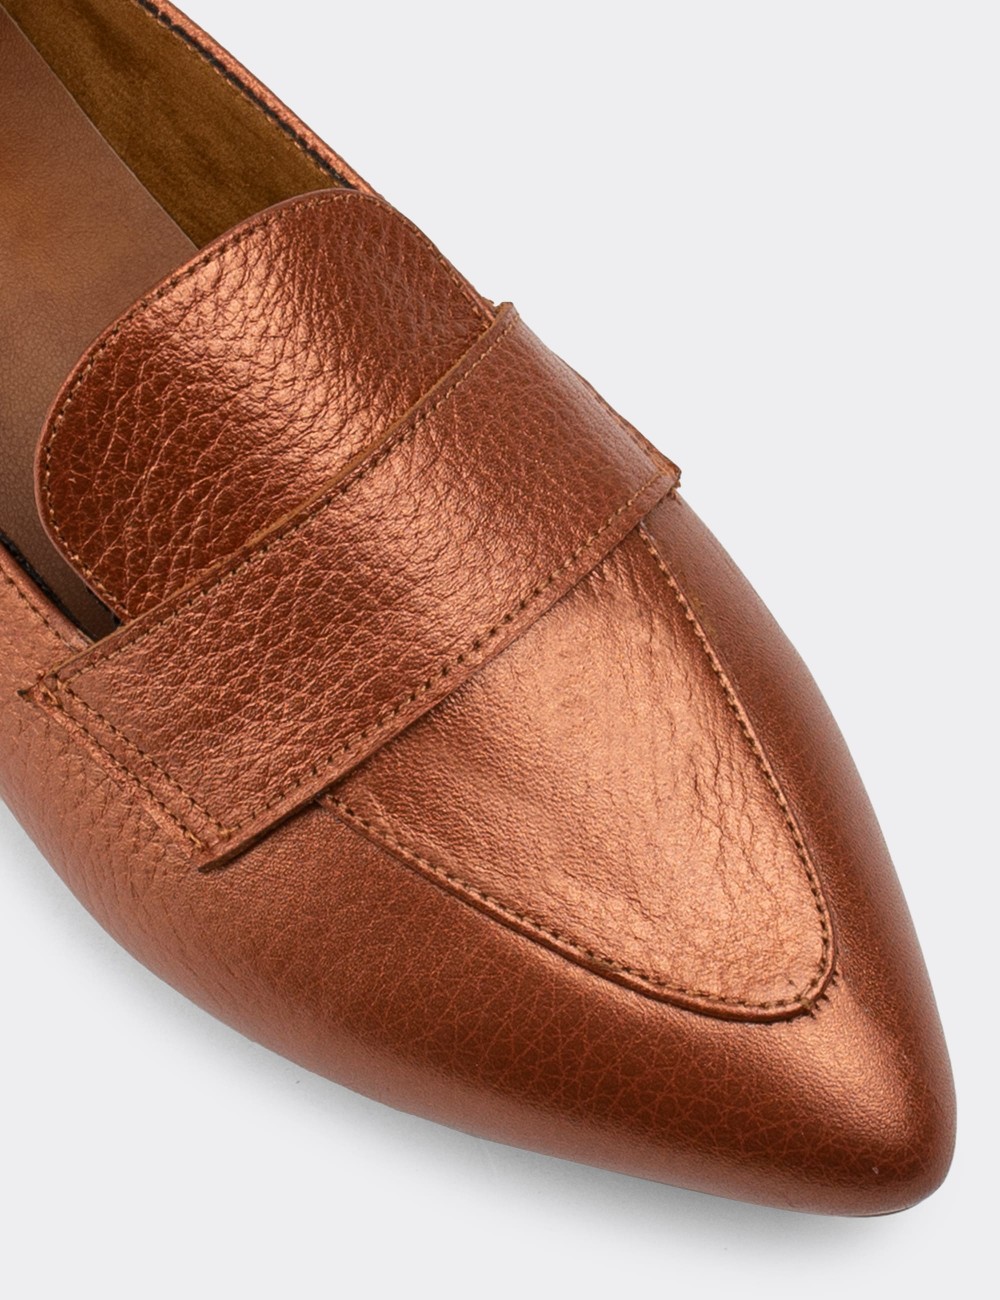 Copper  Leather Loafers - 01897ZBKRC01